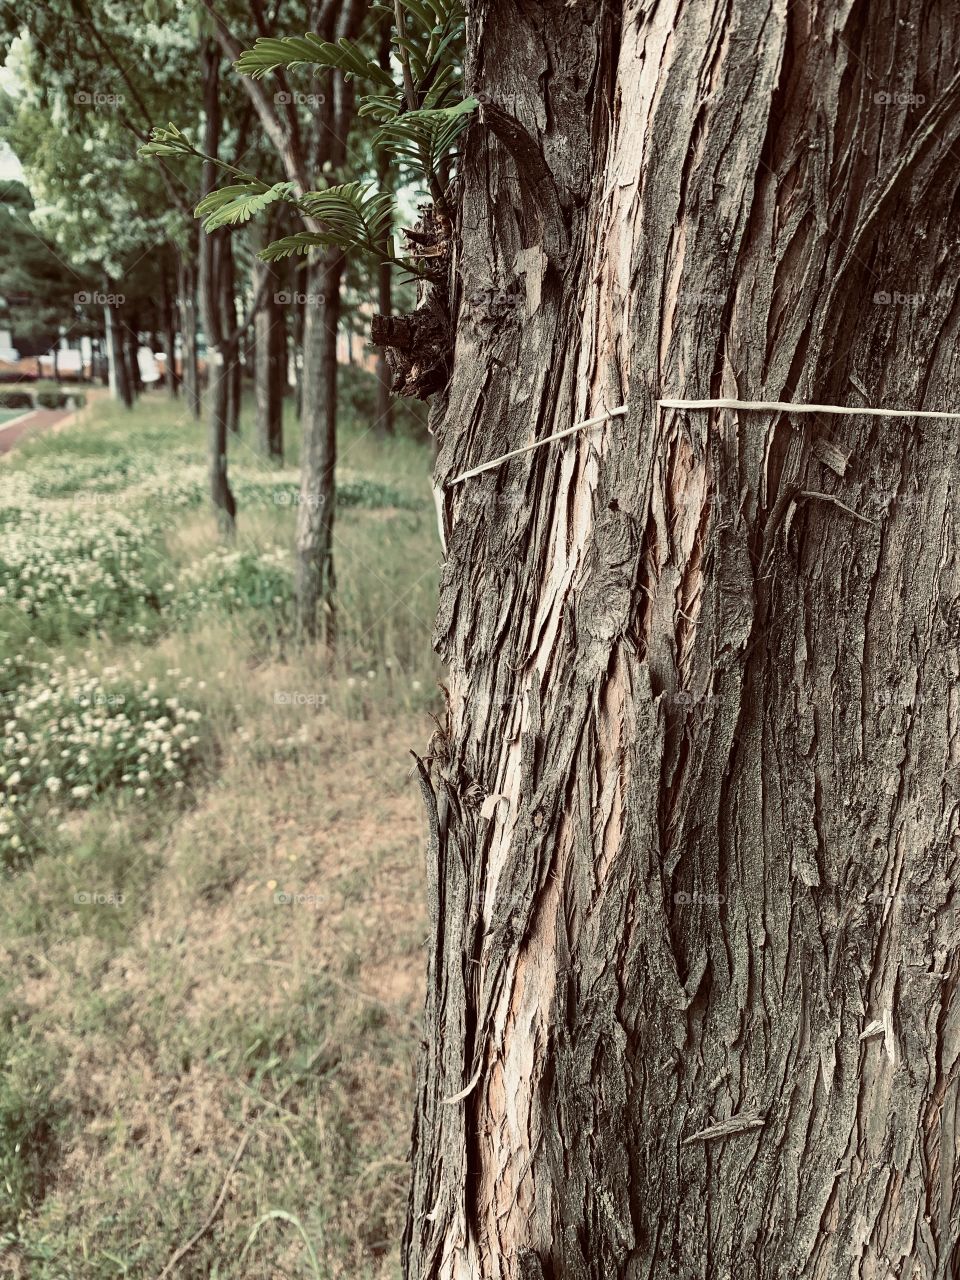 In nature, nothing is perfect and everything is perfect. Trees can be contorted, bent in weird ways, and they’re still beautiful.... make your wallpaper.